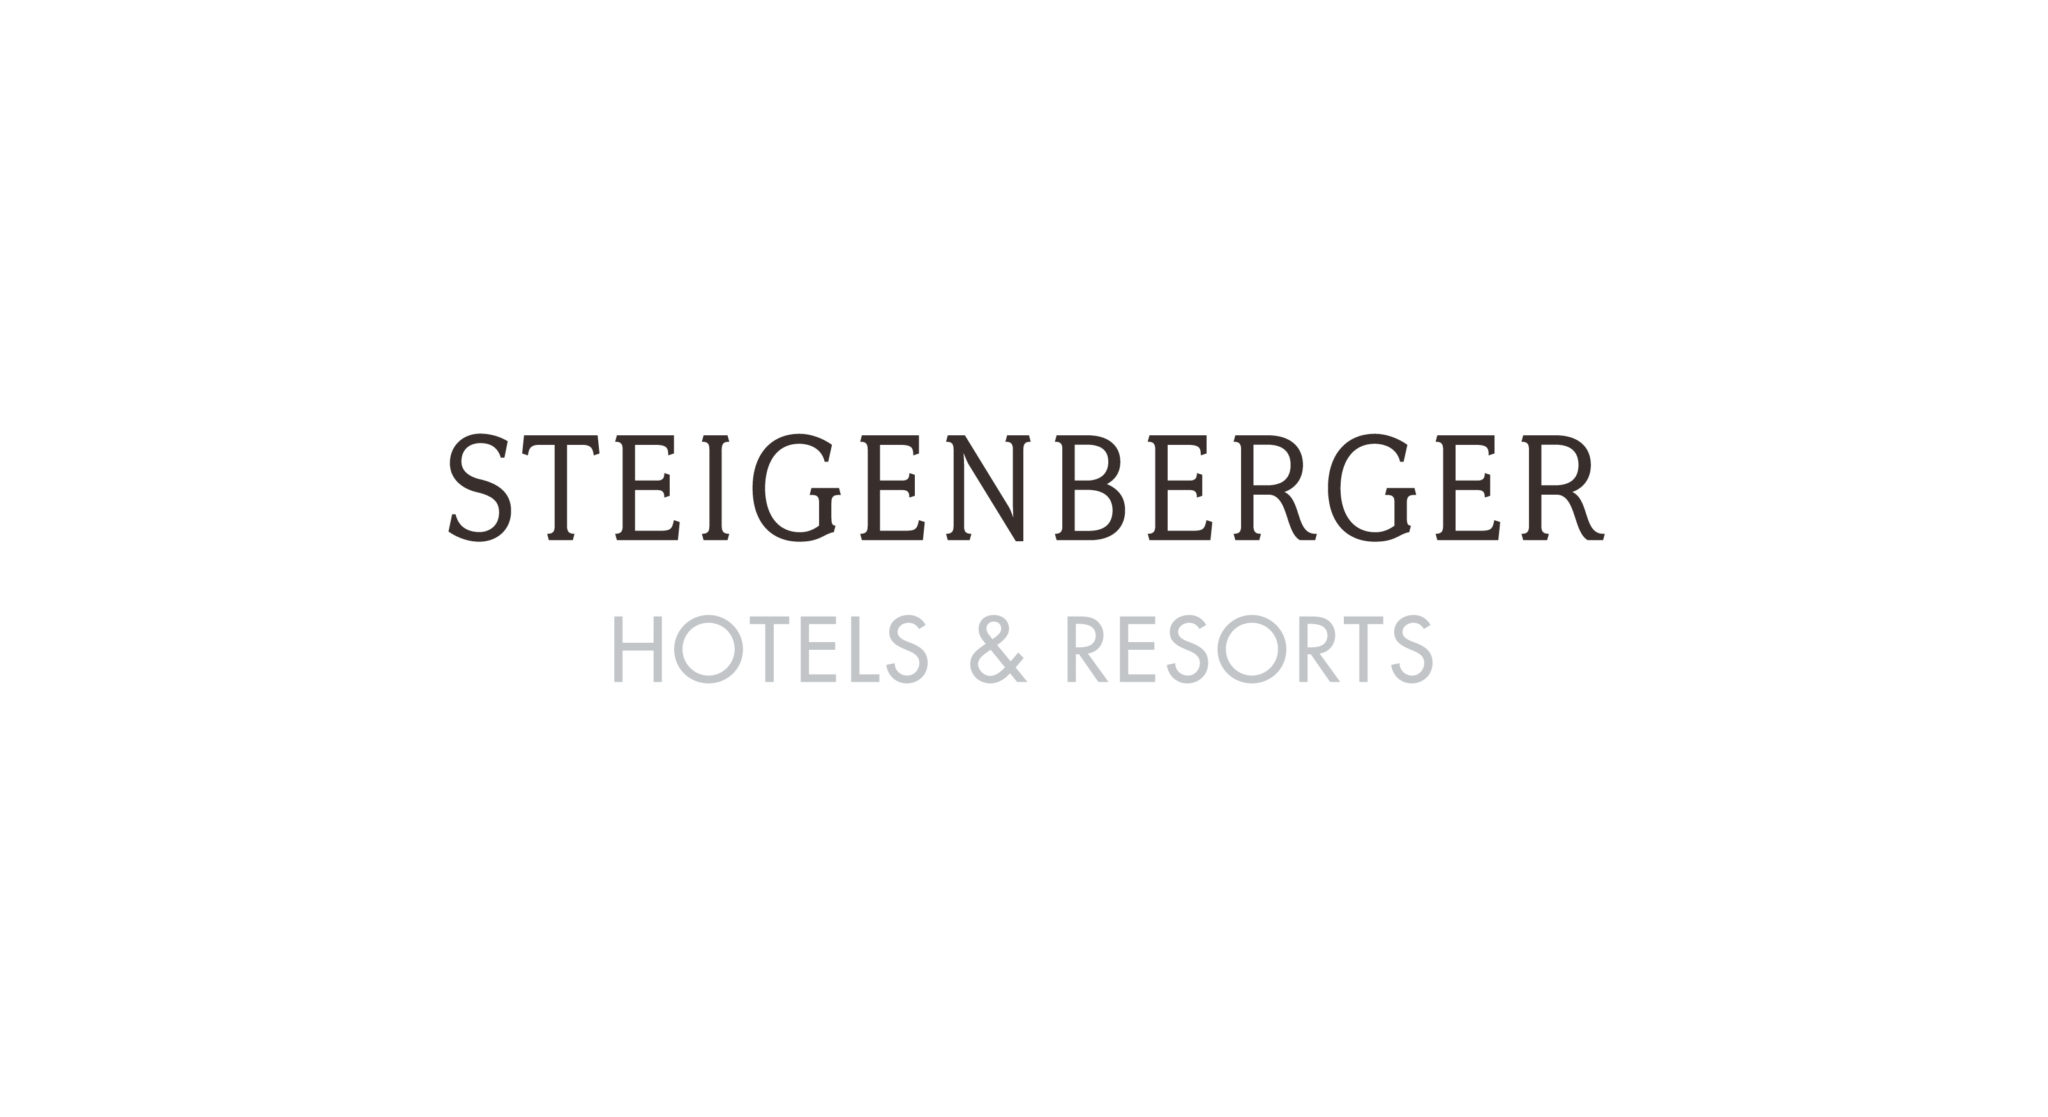 QUO Partners with Steigenberger in Brand Relaunch